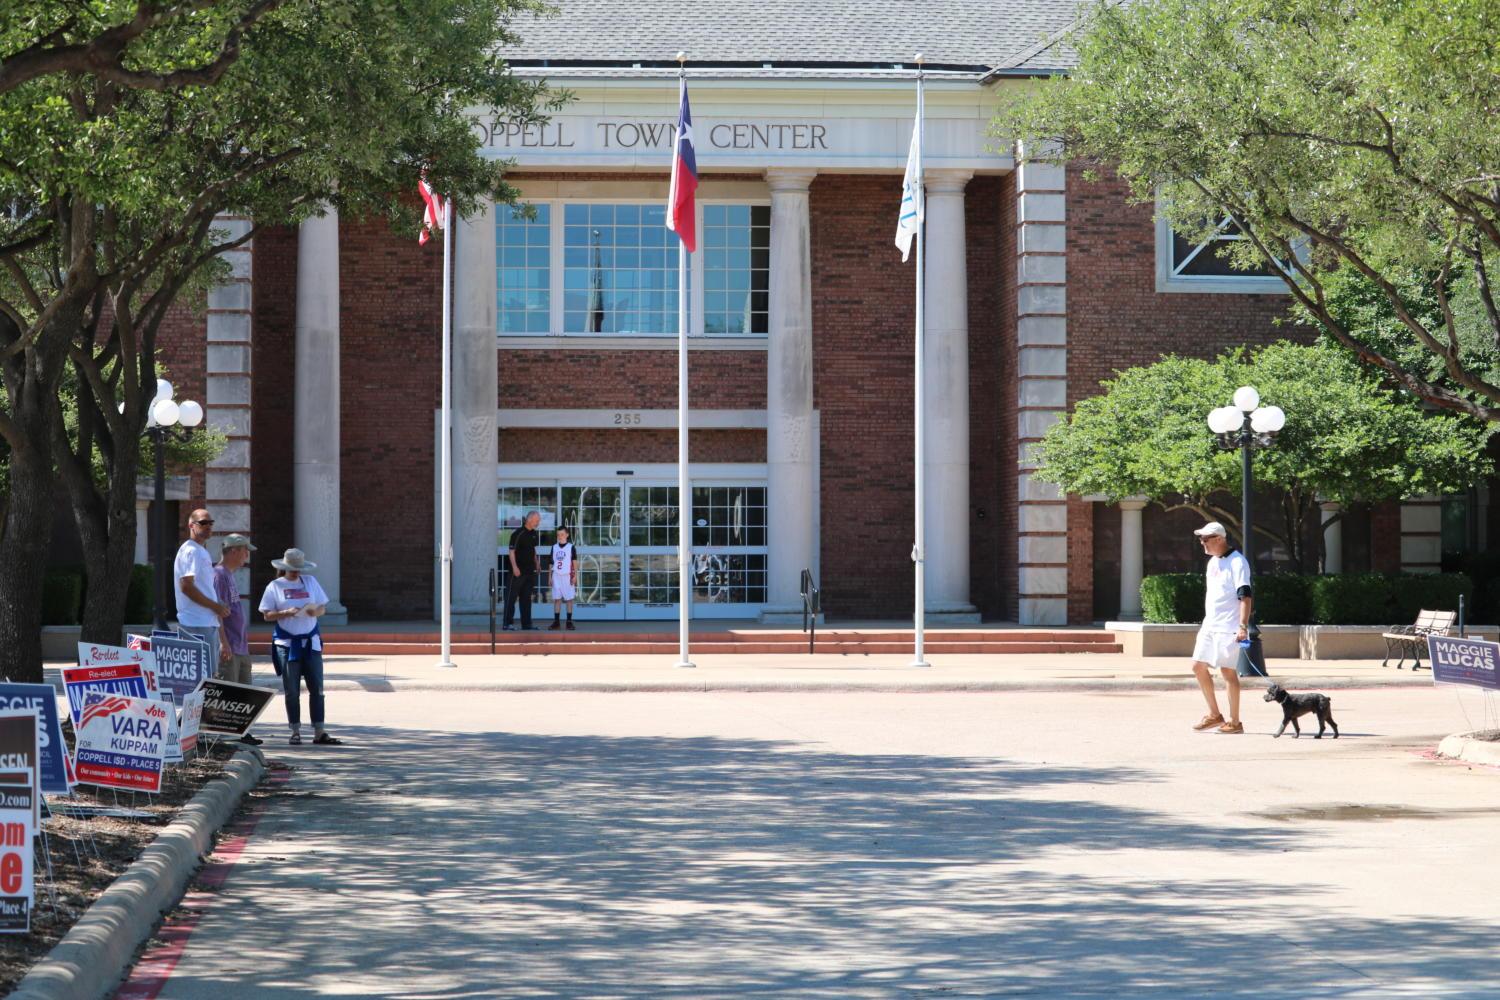 Voters exit the polls at City Hall in the morning on Saturday, May 6 in Coppell. Positions for both the Coppell City Council and CISD Board of Trustees were made during this election.